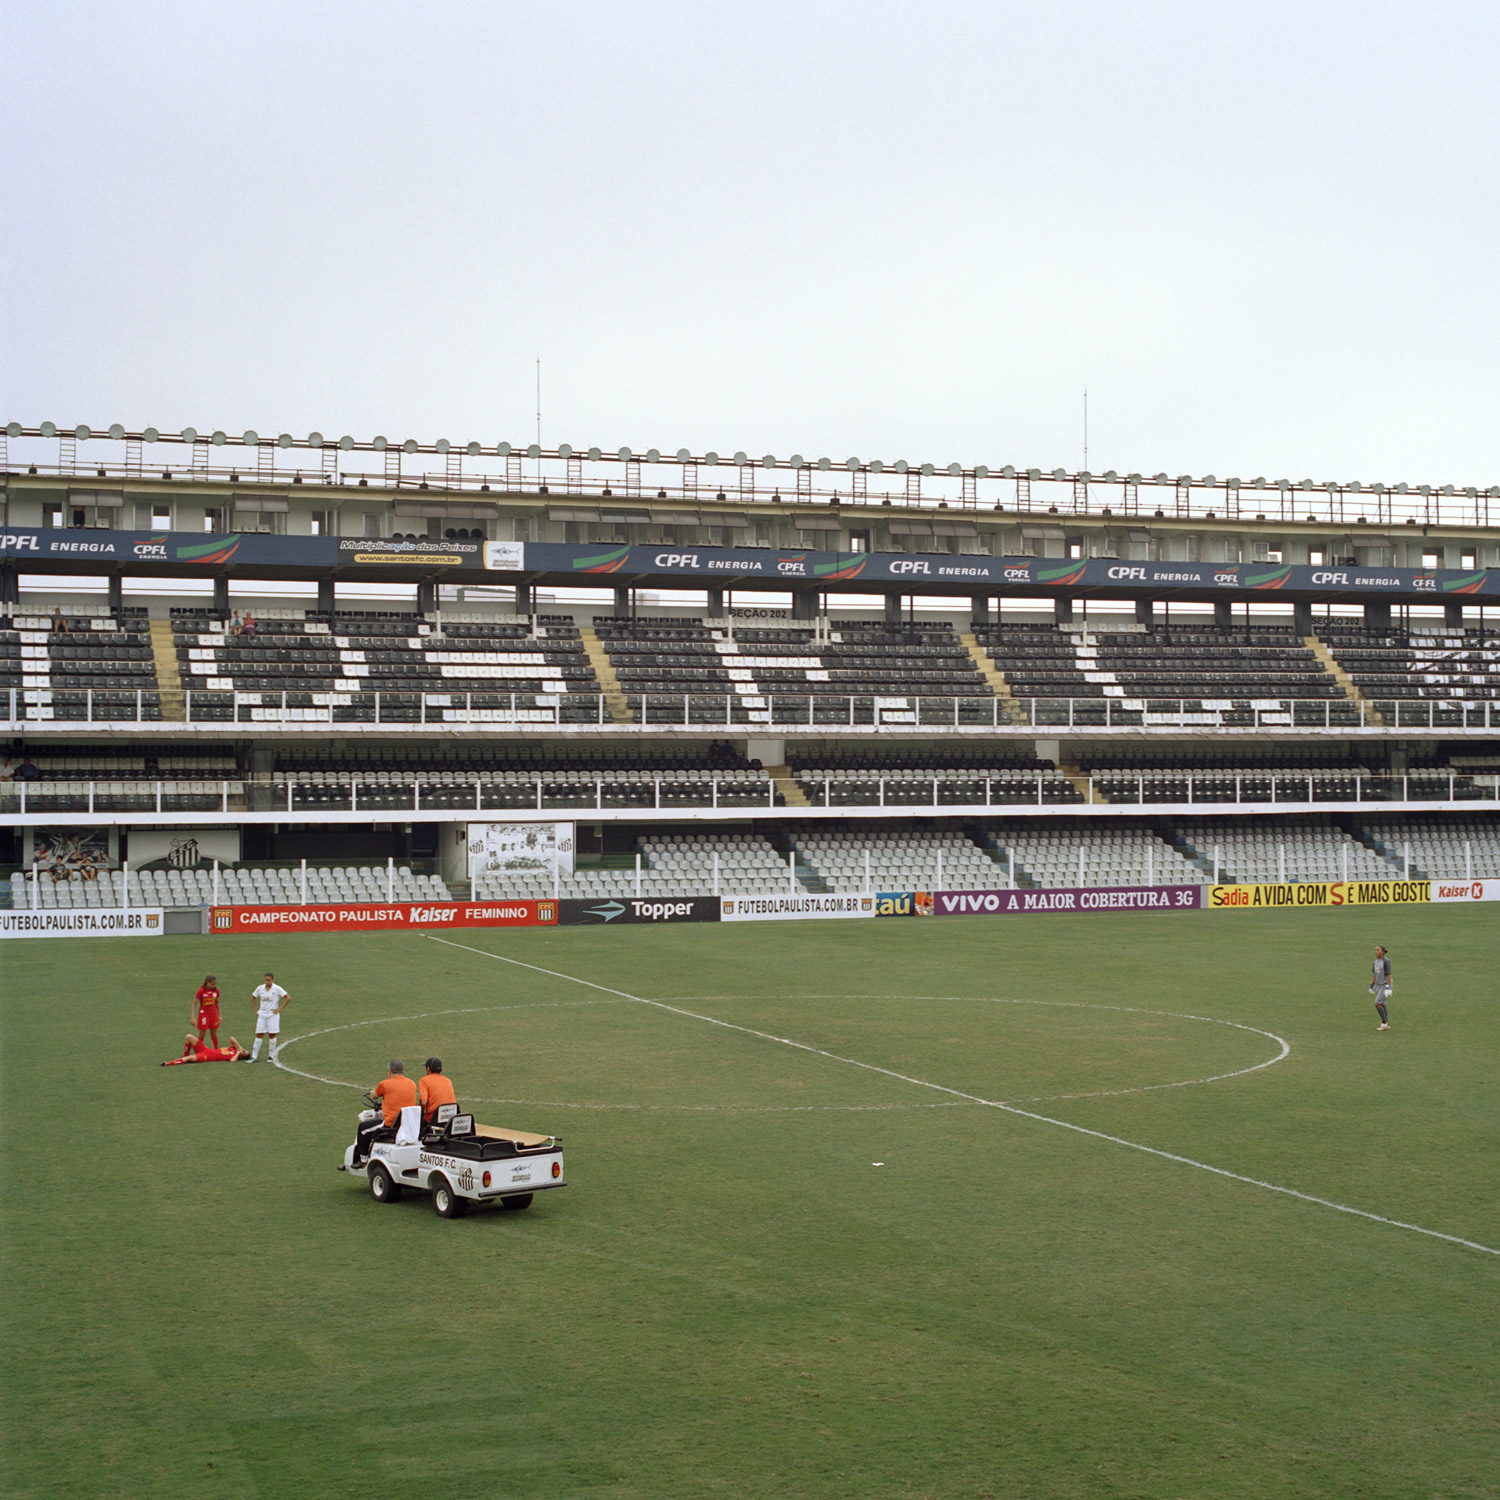 An injured Rio Preto EC player awaits medical assistance during a semi-final match versus Santos FC in the Copa Libertadores national tournament played in Santos' Estádio Vila Belmiro in Santos, Brazil. The women’s team, nicknamed the Serias da Vila (Vila’s Mermaids), are only granted use of the stadium’s field for final/semi-final matches and if the men are not scheduled to play. (October 23, 2010)